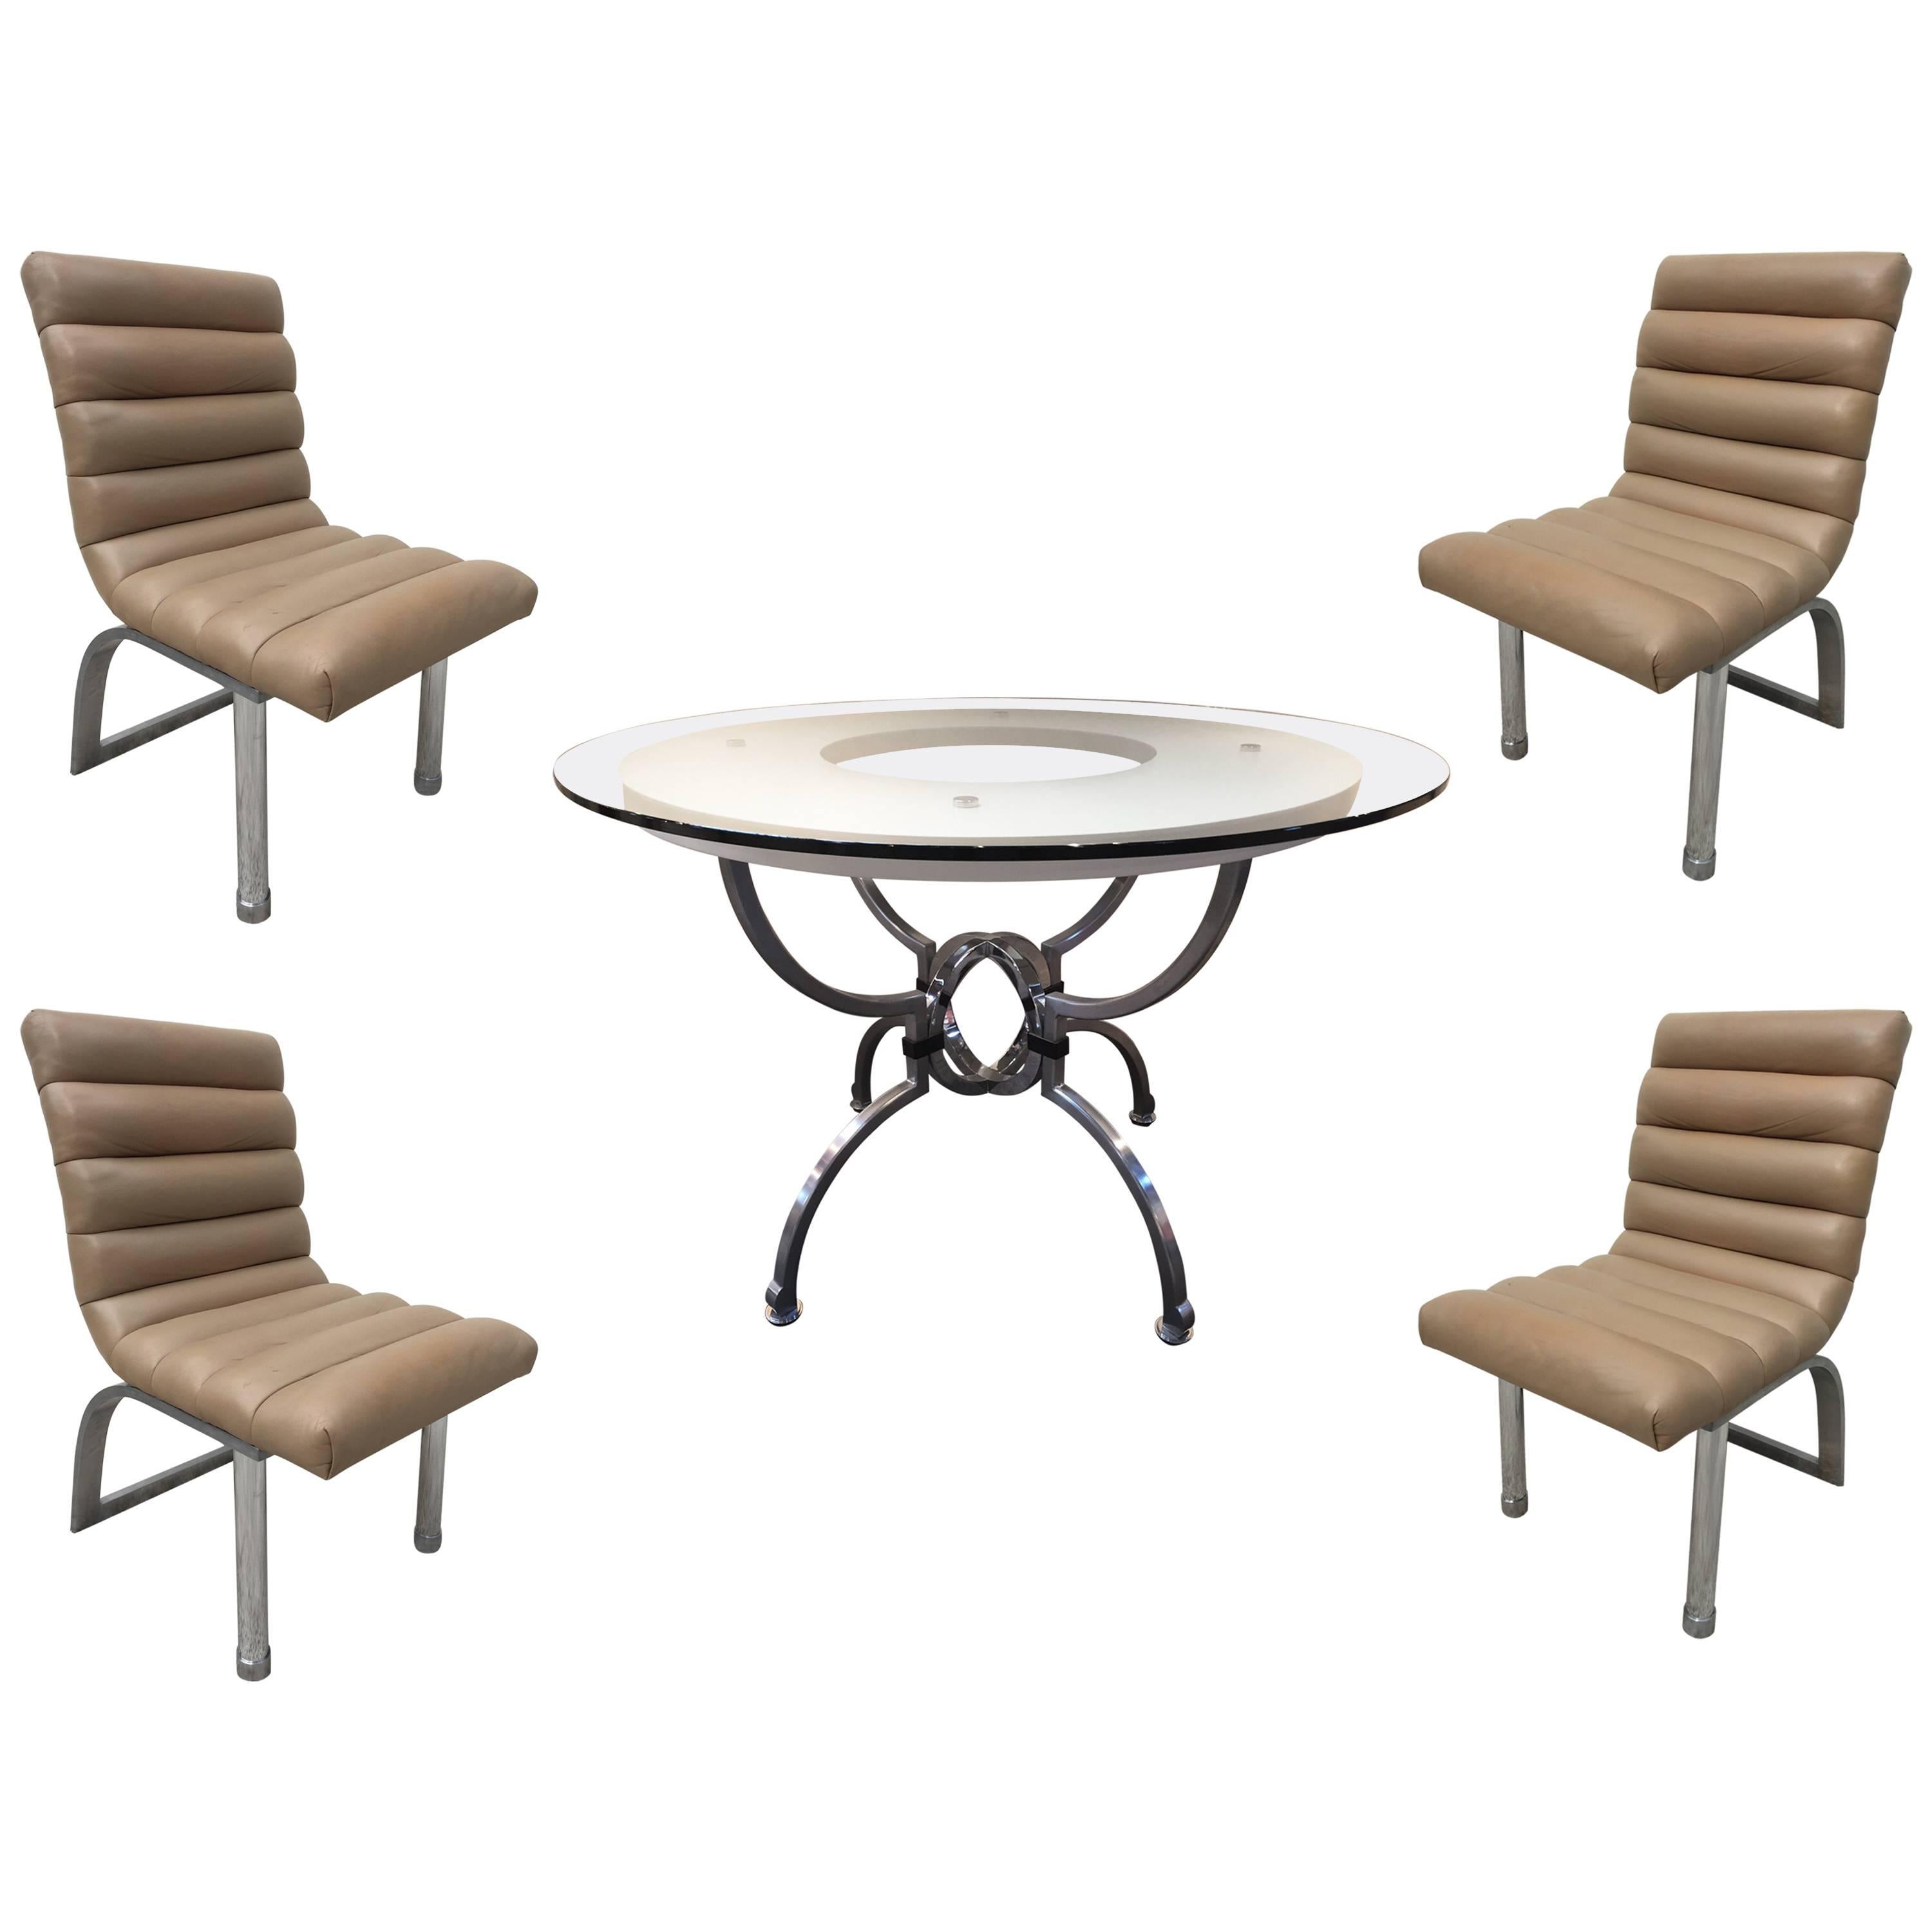 Jay Spectre Eclipse Dining Set Table with Four Leather Chairs